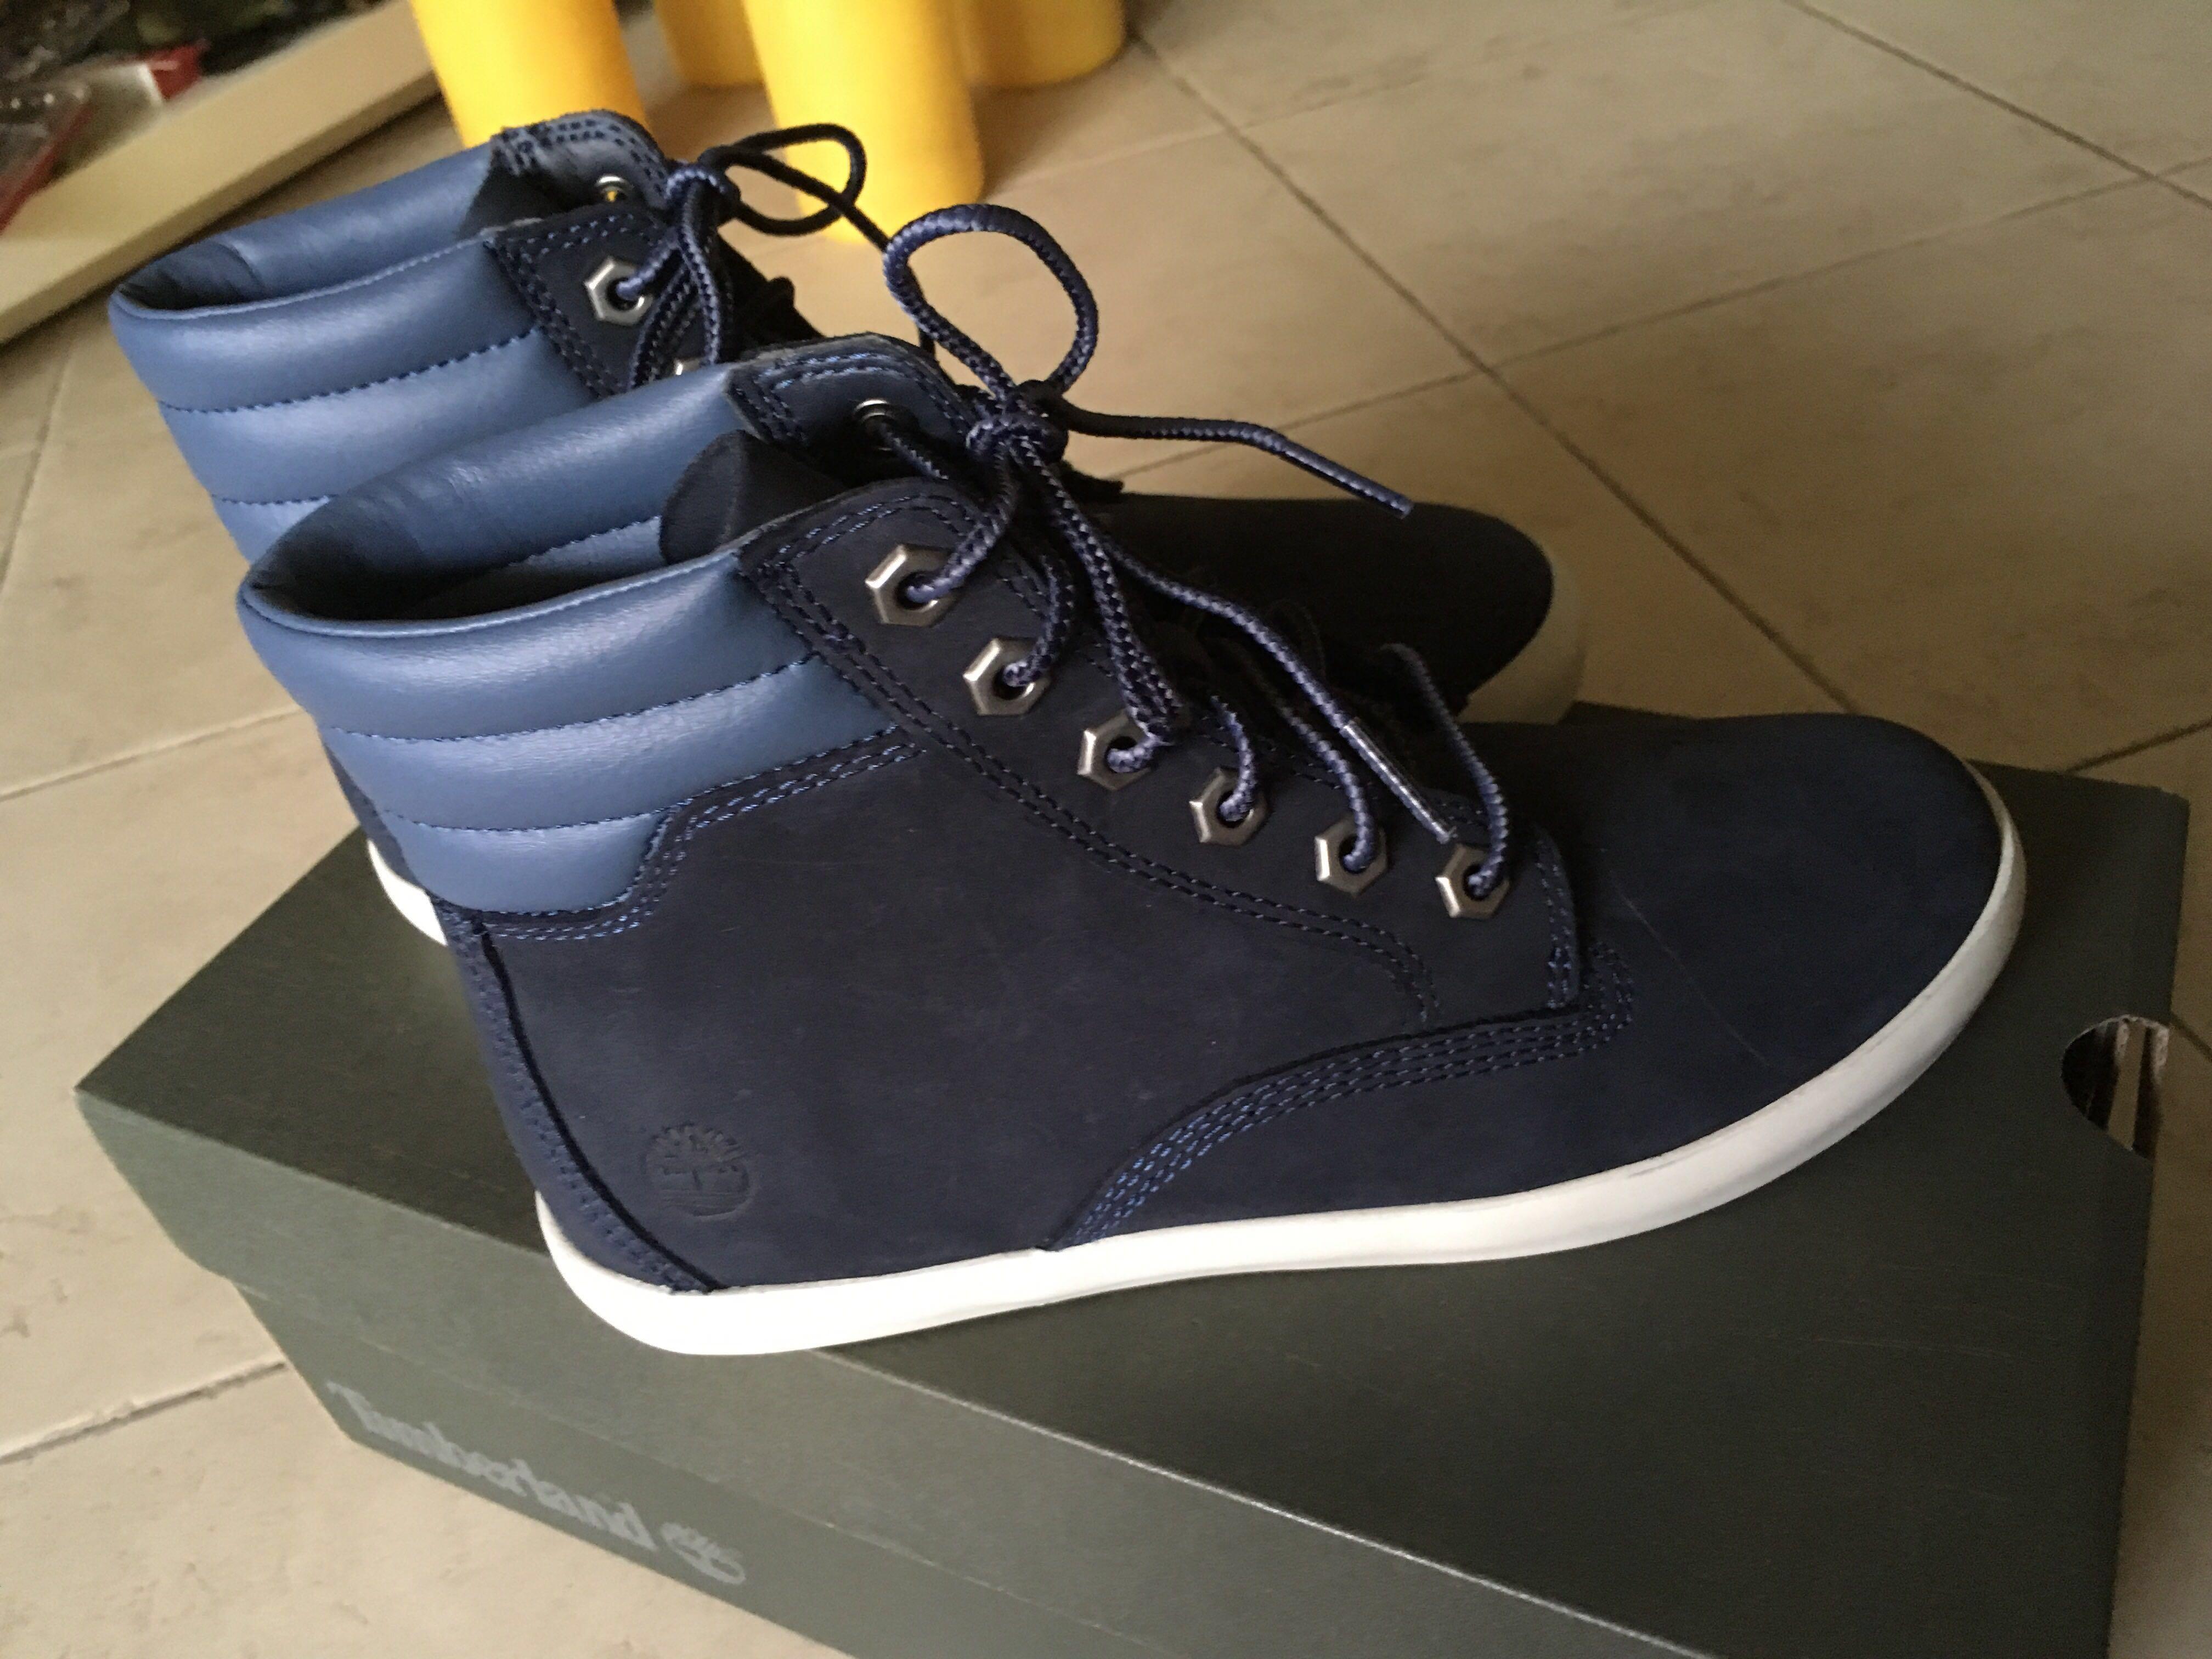 Timberland Women's Boots Navy Euro size 